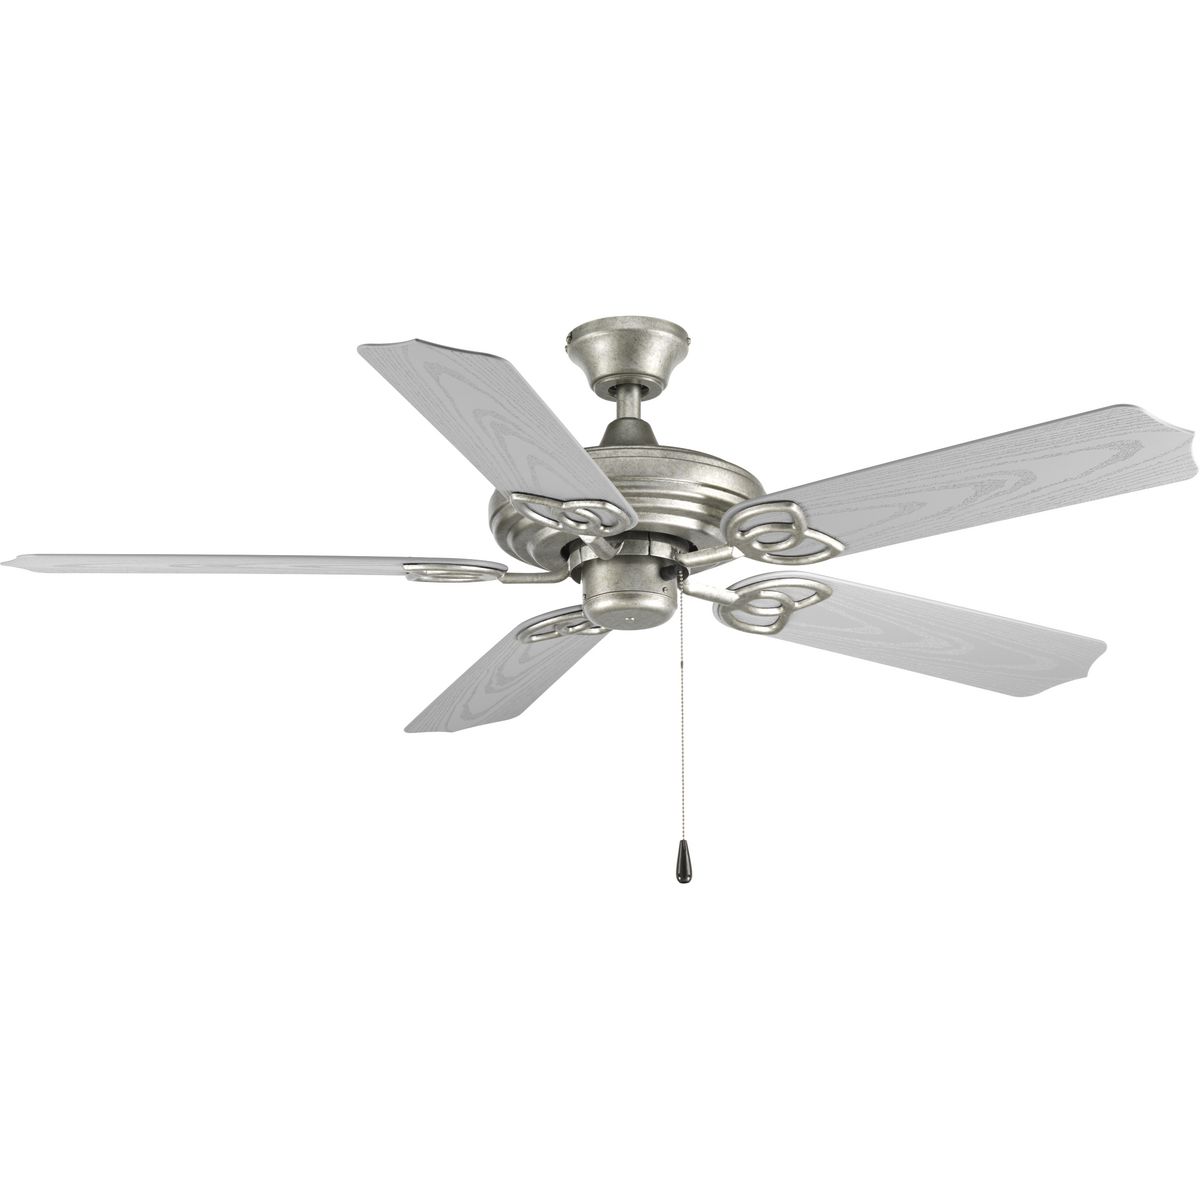 This five-blade 52 inch fan comes with a tri-mount system and a three-speed pull chain switch with 72 inch lead wires. SureConnect� blade attachment and Quick Install Canopy systems included. Finished in galvanized Zinc, the silver blades contain an all weather rating system (ABS). This fan is wet location listed and compatible with universal light kits.